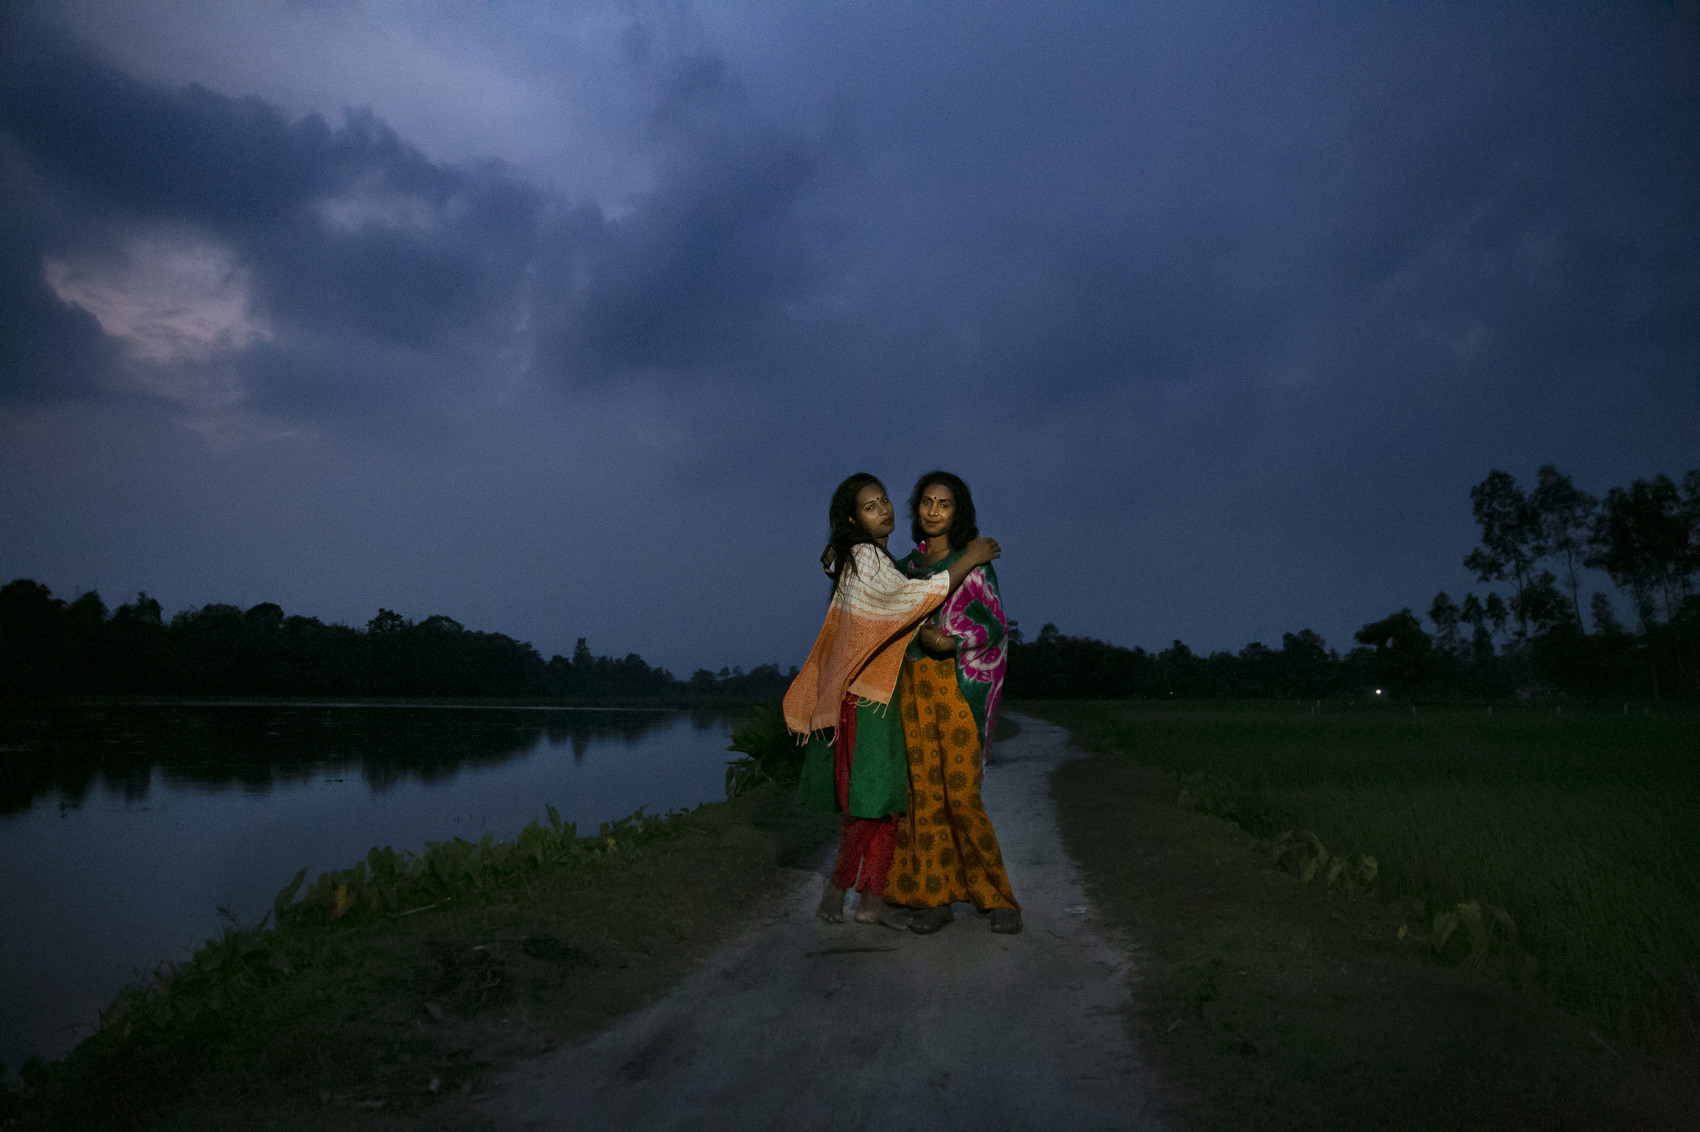 SHERPUR, BANGLADESH - SEPTEMBER 21: Habiba and Rumana post for a photo on the road outside their village on September 21, 2021 in Sherpur, Bangladesh. Rumana was 12 or 13 when she joined the Hijra community. She was born with incomplete genitals and never felt or acted like a boy. She liked to dress like a girl, play with girls, and was always attracted to boys. Rumana met a Hijra group in the market when she was 12 year old and they invited her to join them. {quote}There are two parts of Hijra life; the bad, people bully and hate us. But the positive is that we life together, eat together, have community.{quote} Habiba says {quote}I am also a human being, I have a right to live life as a Hijra and I should not be deprived of that.{quote} She was always bullied in school for acting feminine so she dropped out in class 6. She met some Hijras in a market and joined them when she was very young. In South Asia, “hijras” are identified as a category of people who are assigned as male at birth but develop a feminine gender identity. They are generally outcasted from mainstream society, and have no other way of earning money other than harassing and extorting people for money. A new government initiative aims to change that. Recently, 40 Hijra were given homes, grants, loans, livestock, and livelihood training in an effort to make them self sufficient. (Photo by Allison Joyce/Getty Images)